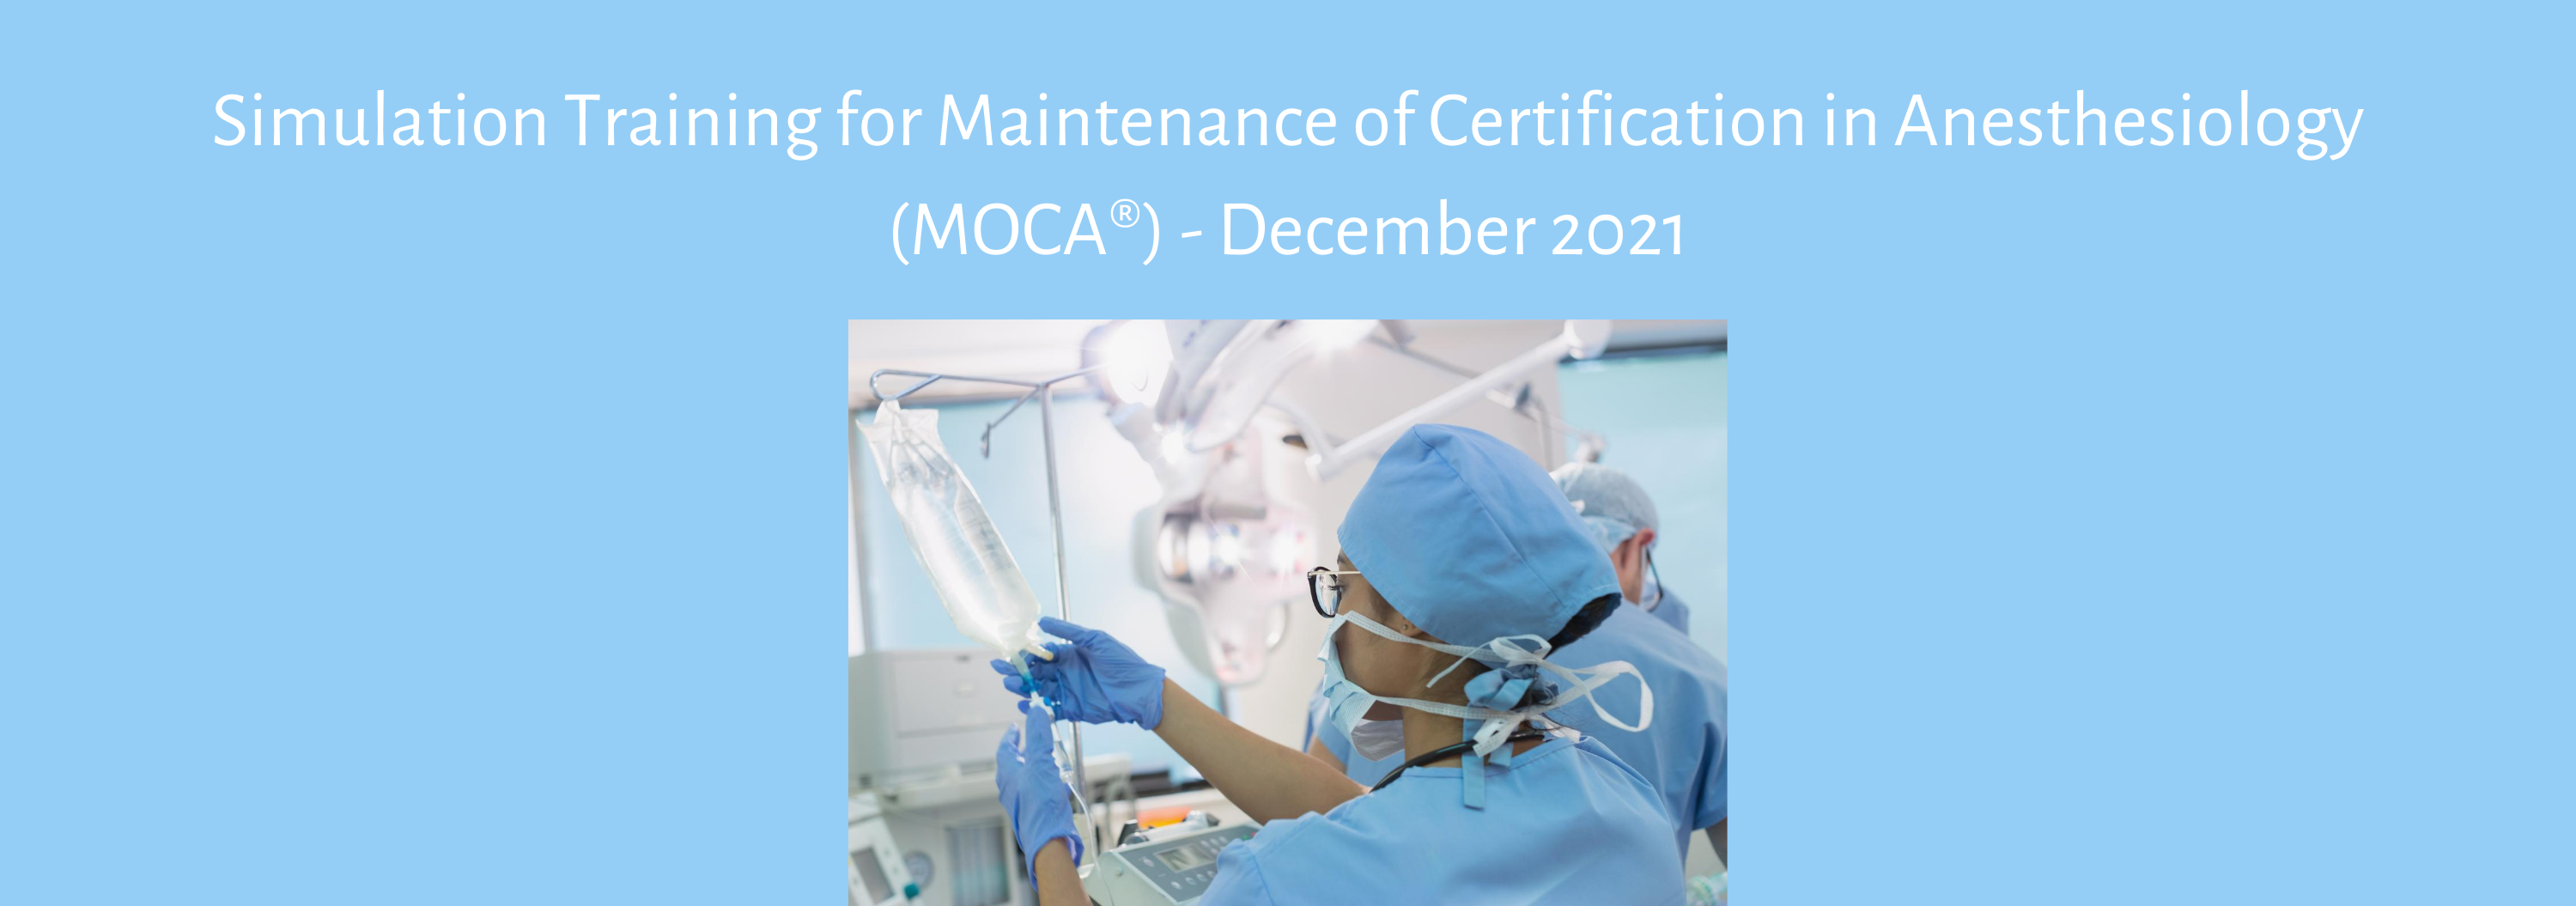 Simulation Training for Maintenance of Certification in Anesthesiology (MOCA) - December 2021 Banner